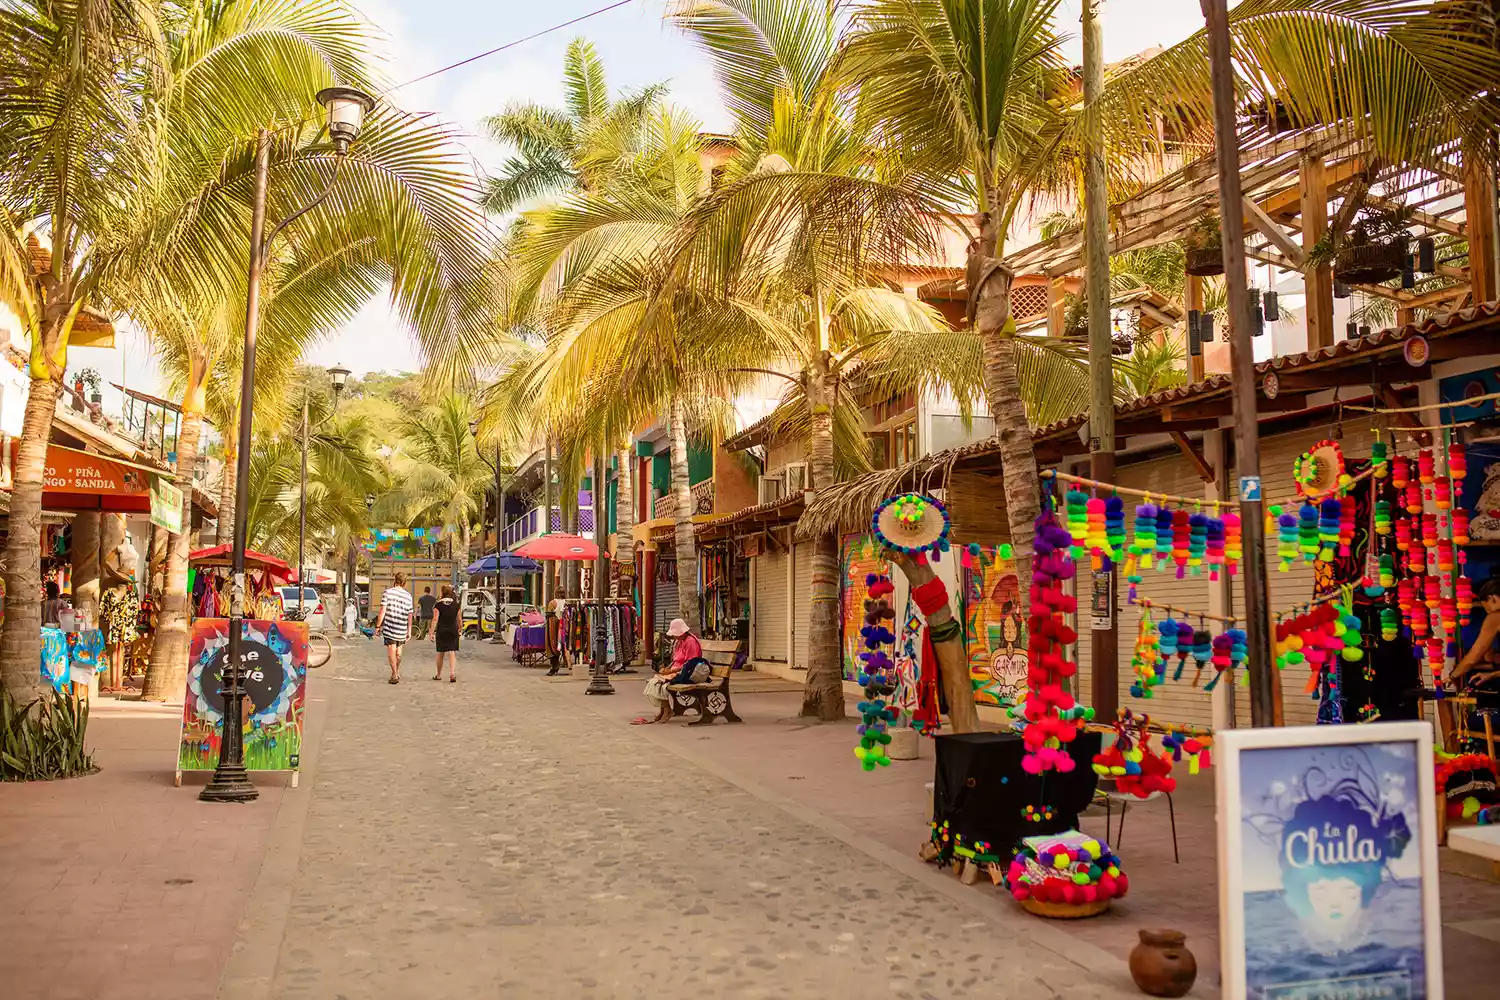 Why Riviera Nayarit Is the Most Popular Winter Destination in Mexico